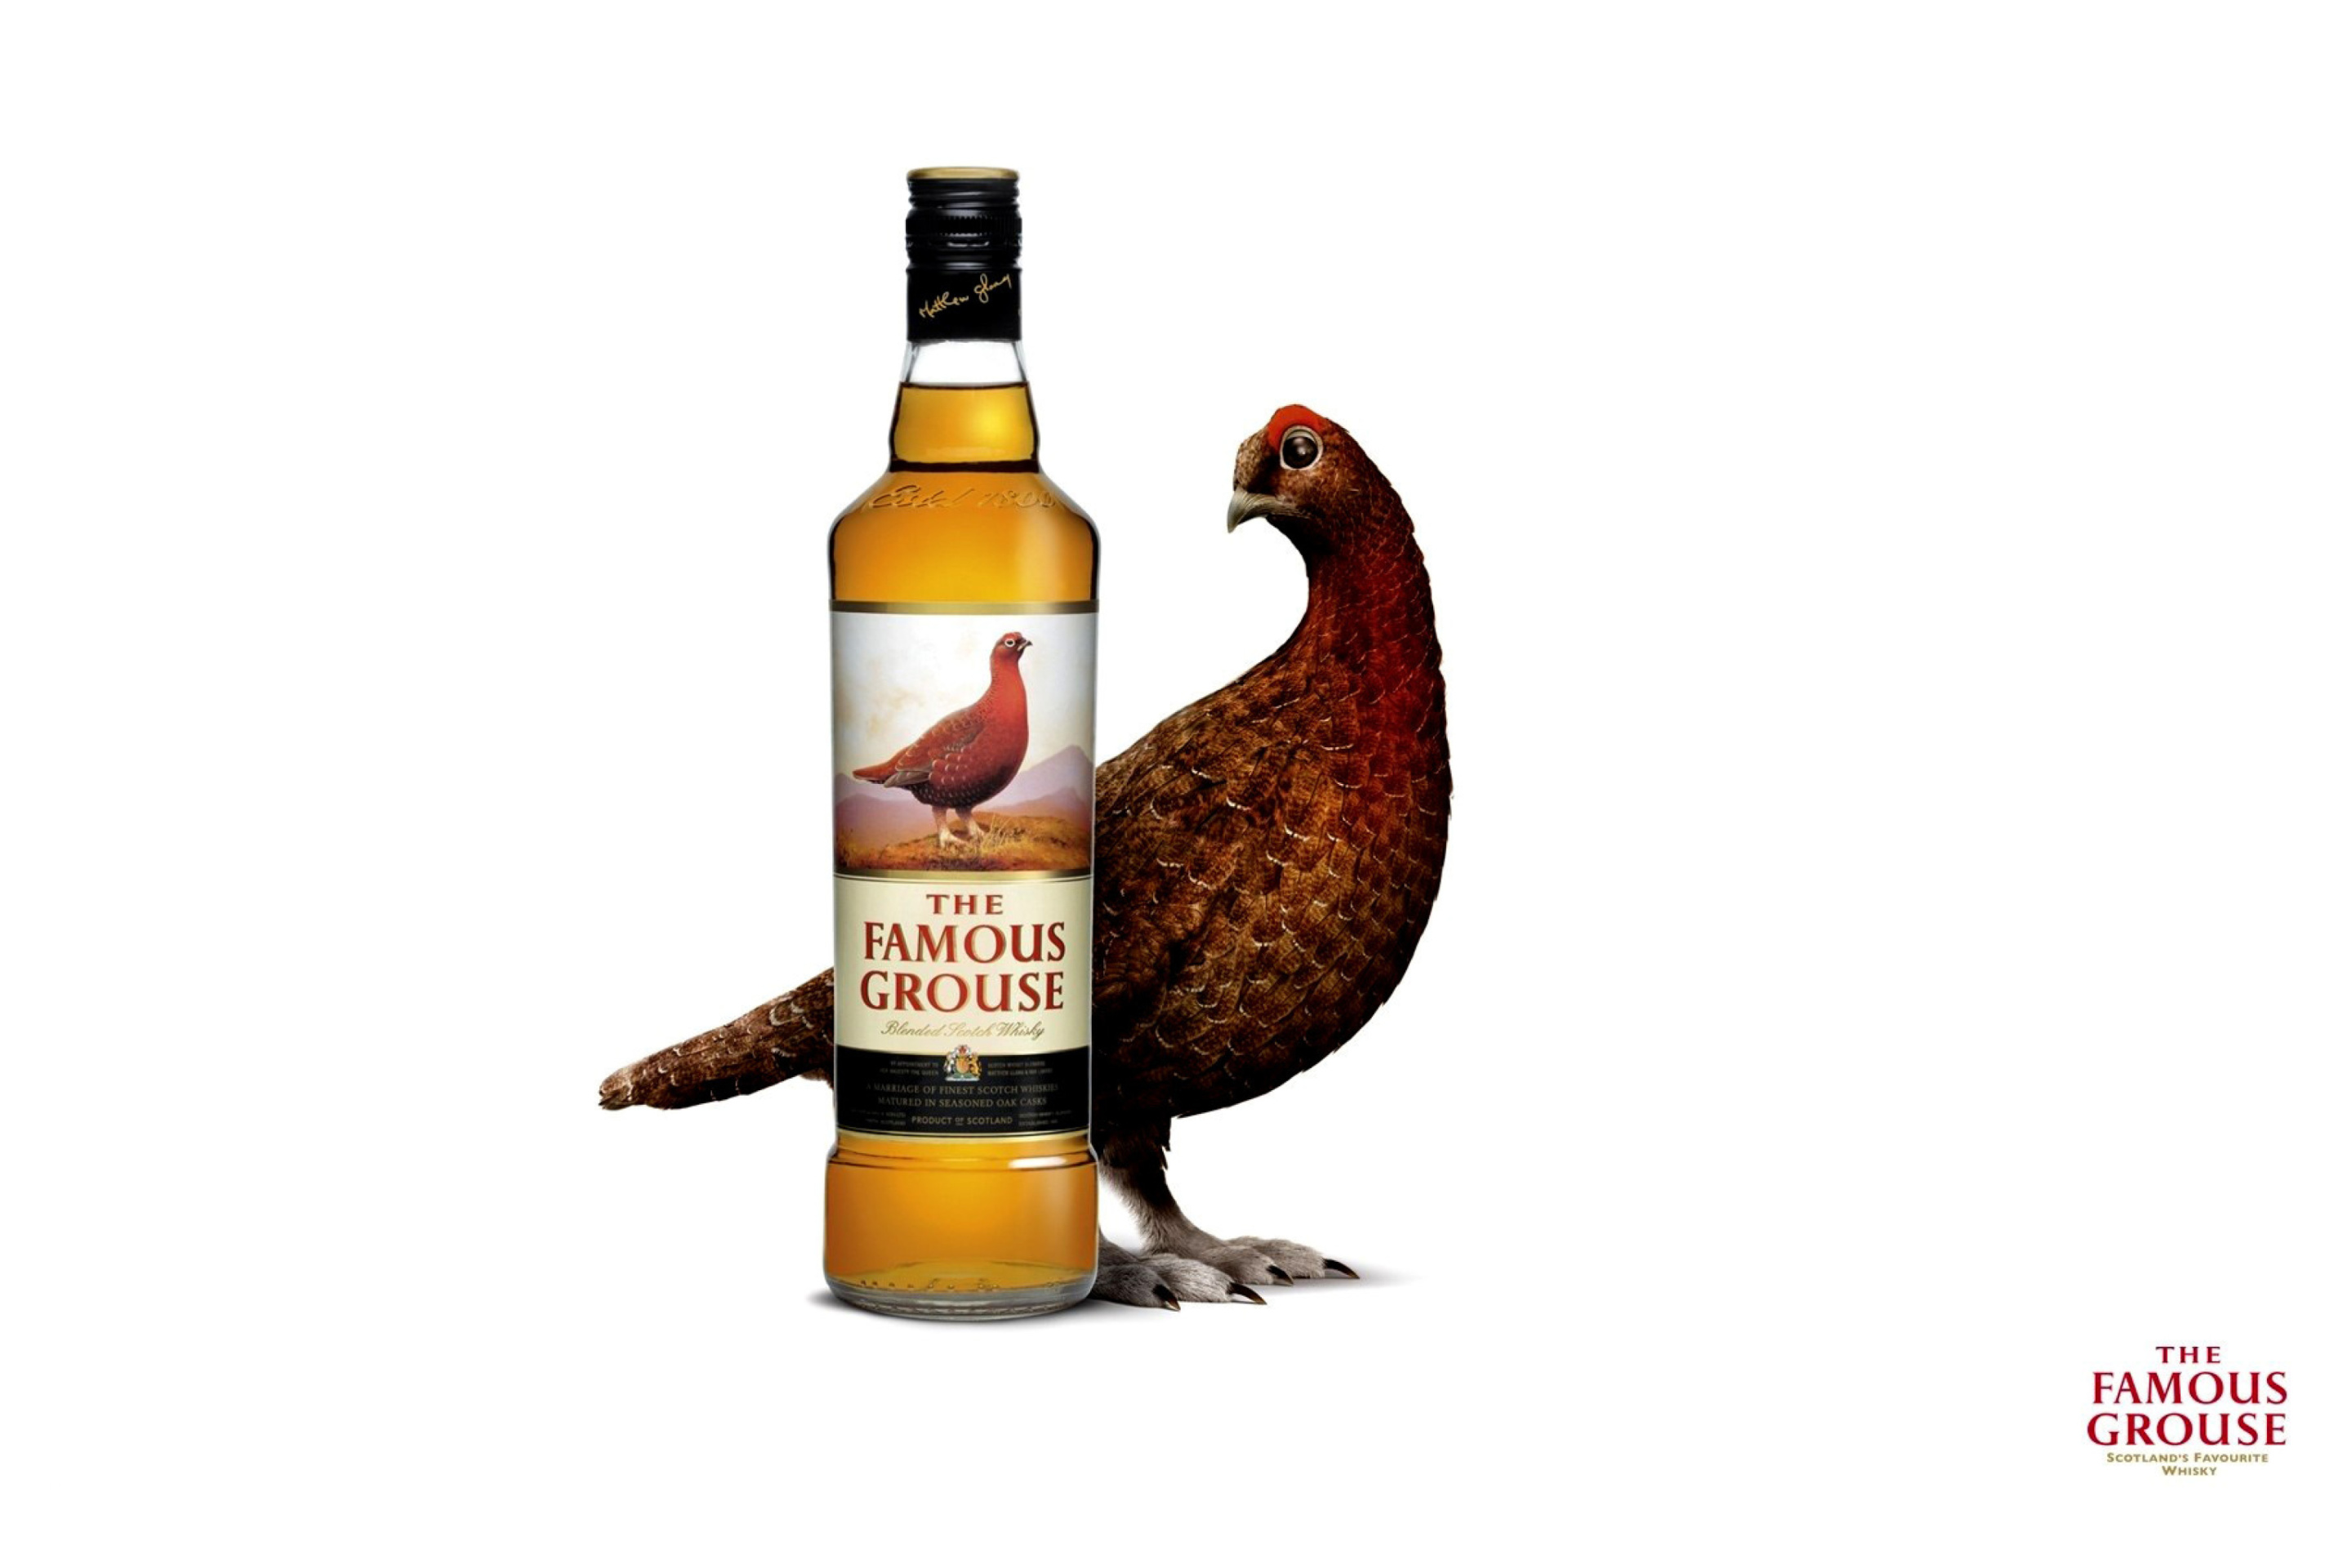 Das The Famous Grouse Scotch Whisky Wallpaper 2880x1920